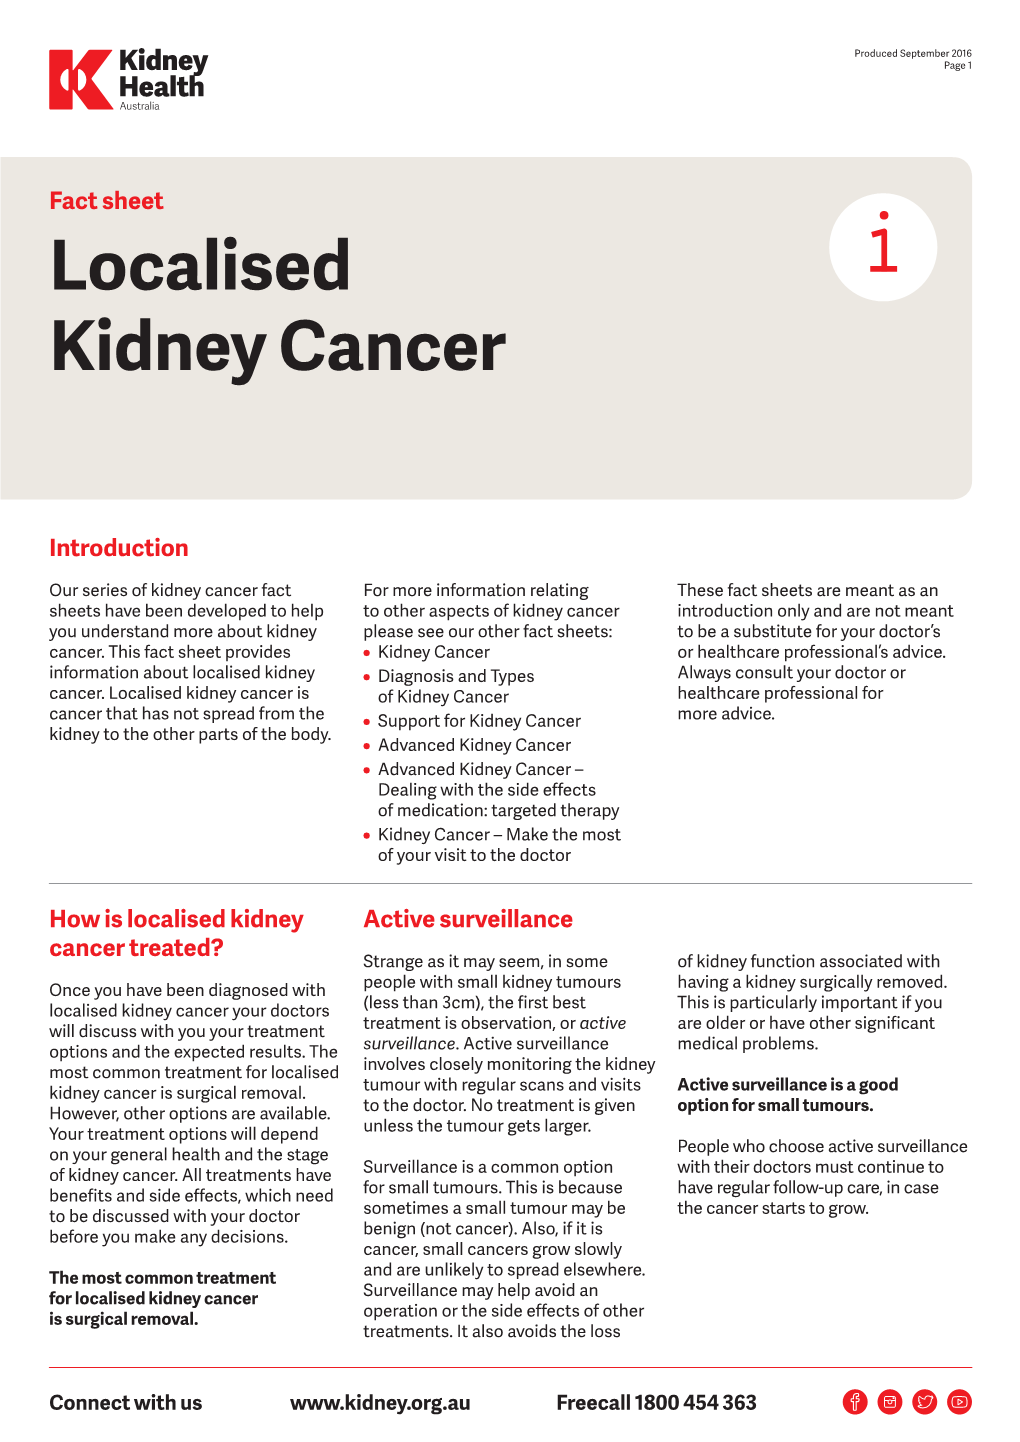 Localised Kidney Cancer Fact Sheet